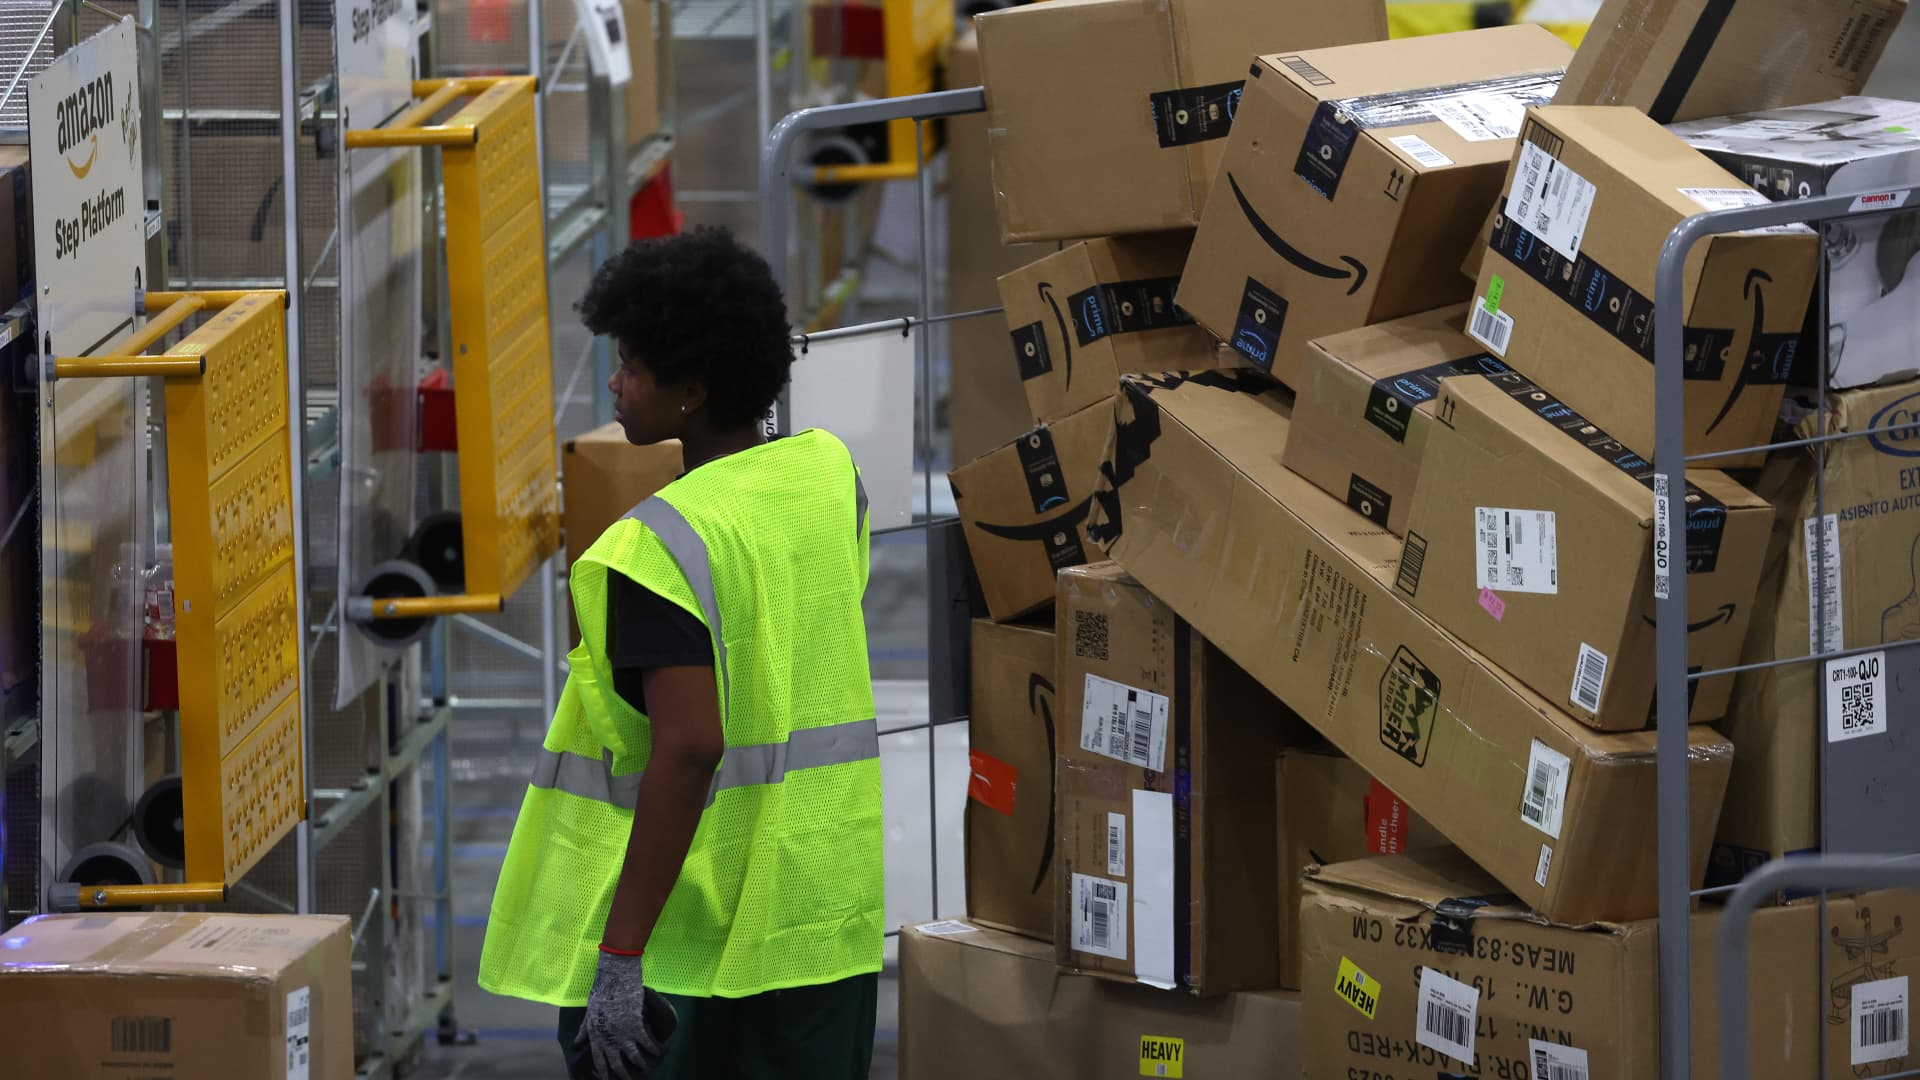 Amazon workers move carts filled with packages at an Amazon delivery station on November 28, 2022 in Alpharetta, Georgia. Amazon is offering deep discounts on popular products for Cyber Monday, its busiest shopping day of the year. 